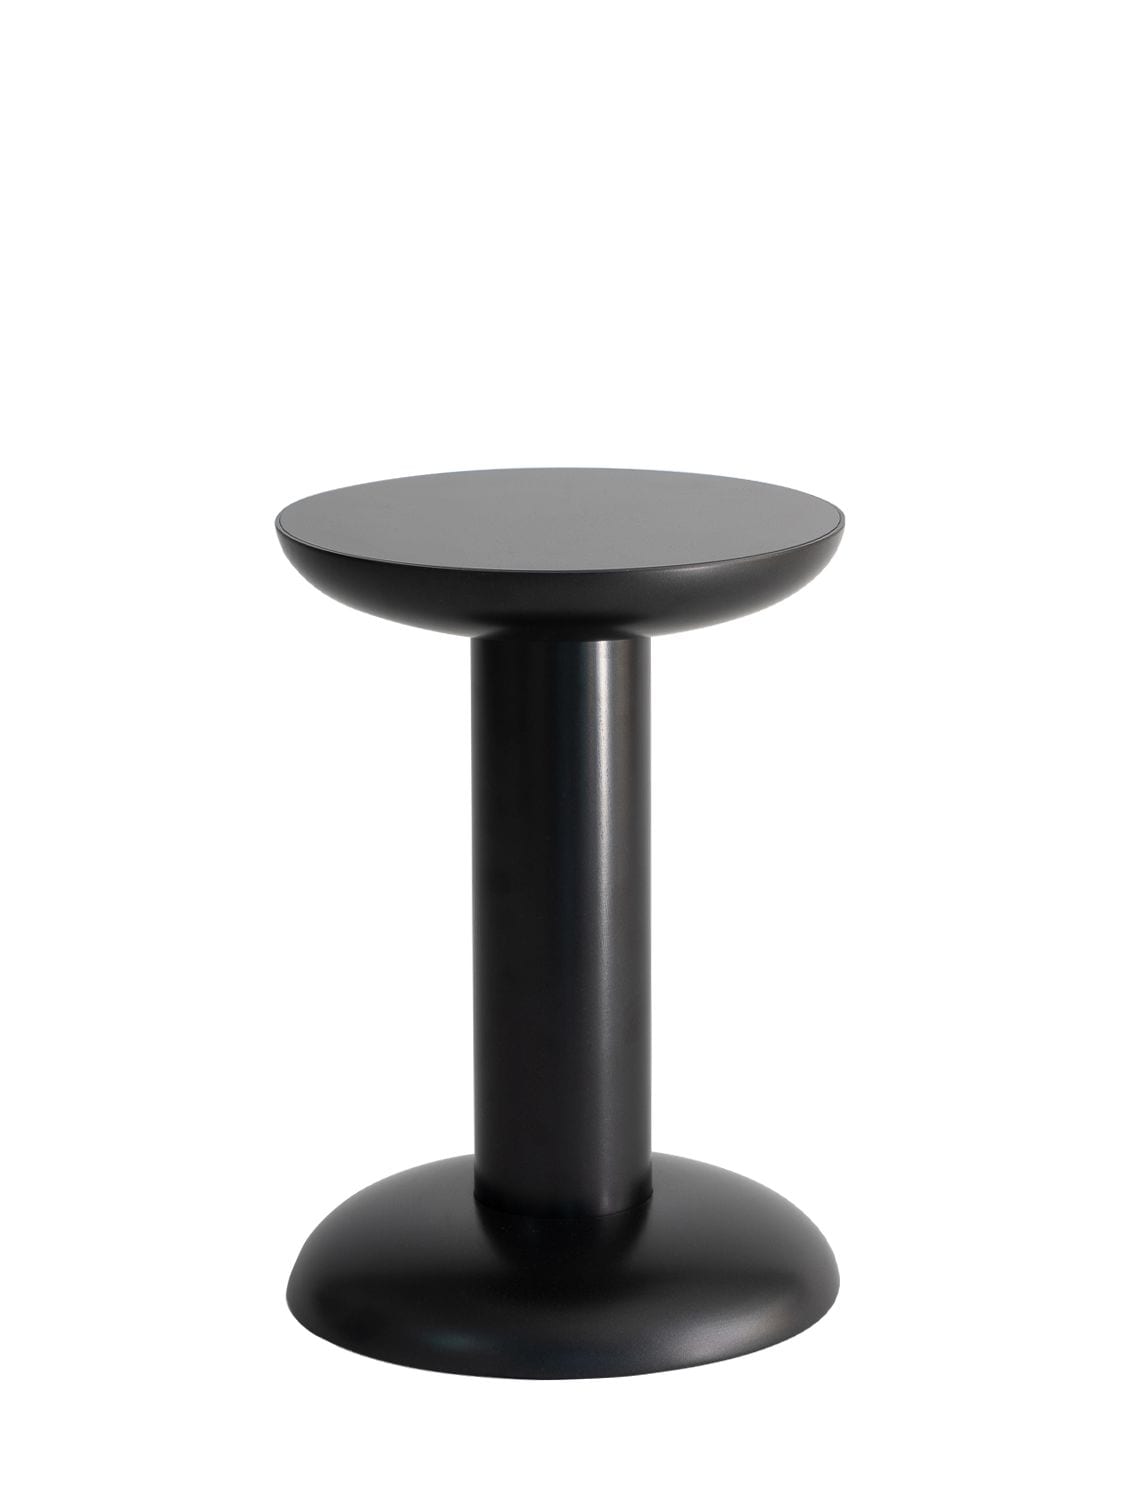 Raawii + George Sowden Thing Aluminum Table In Black